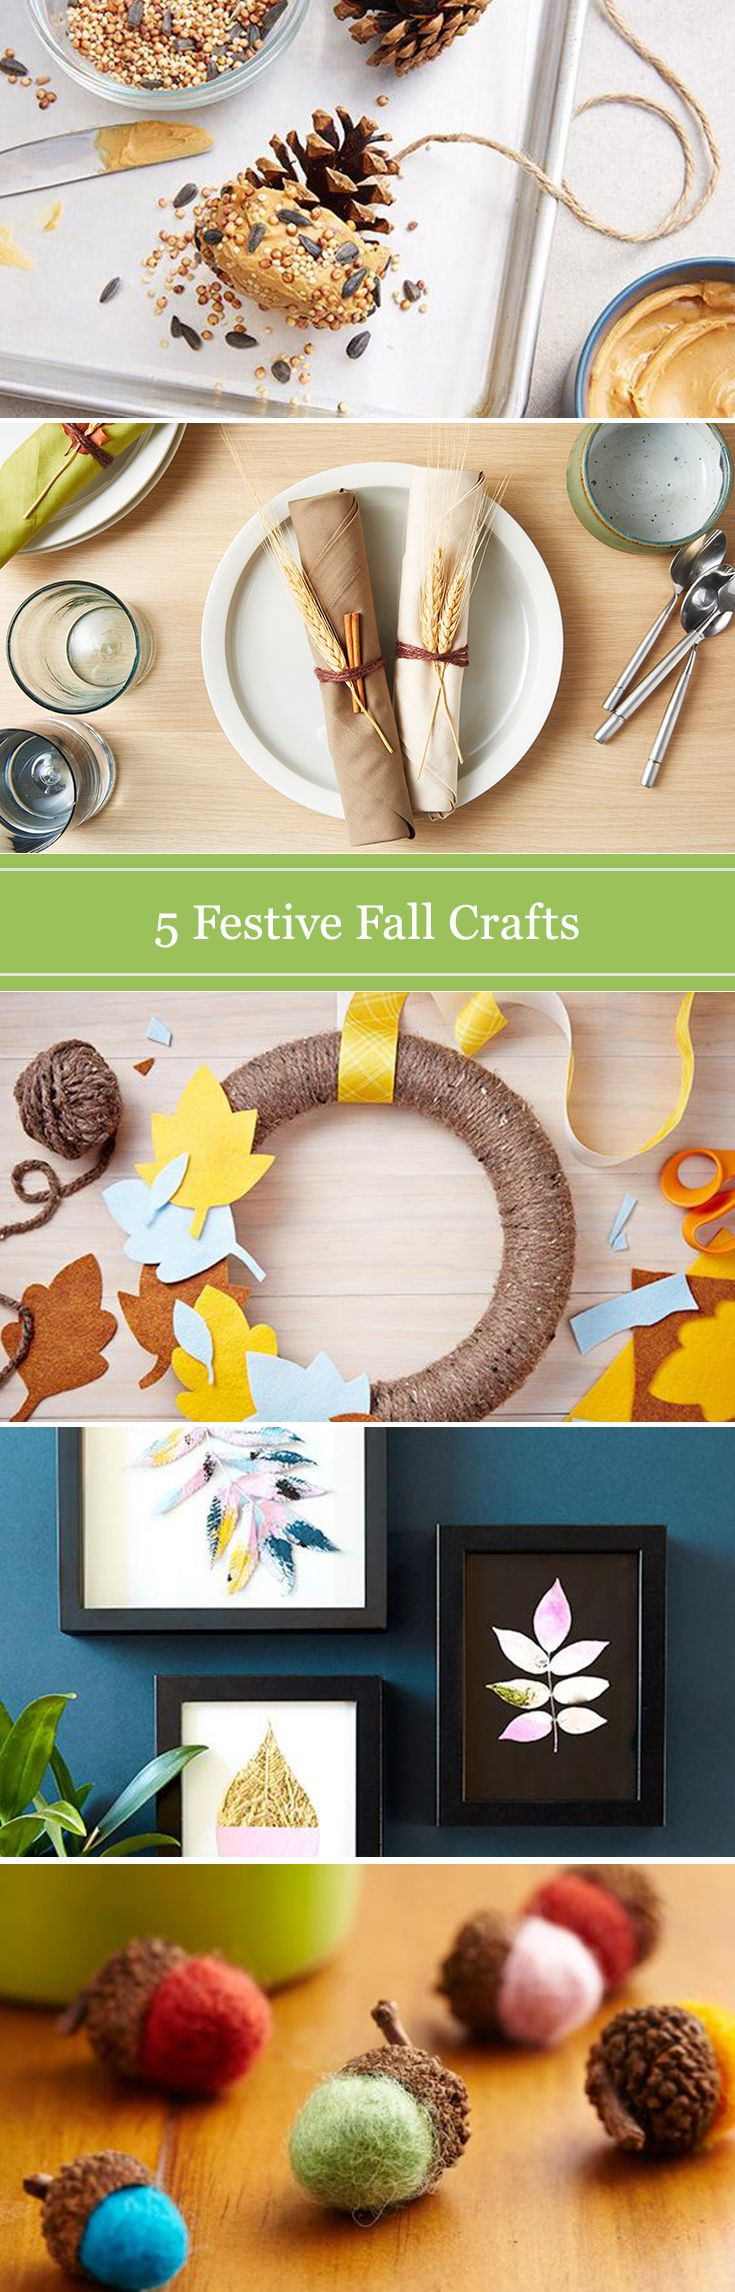 Easy Crafting Ideas For Adults
 51 best Craft Ideas for Adults images on Pinterest